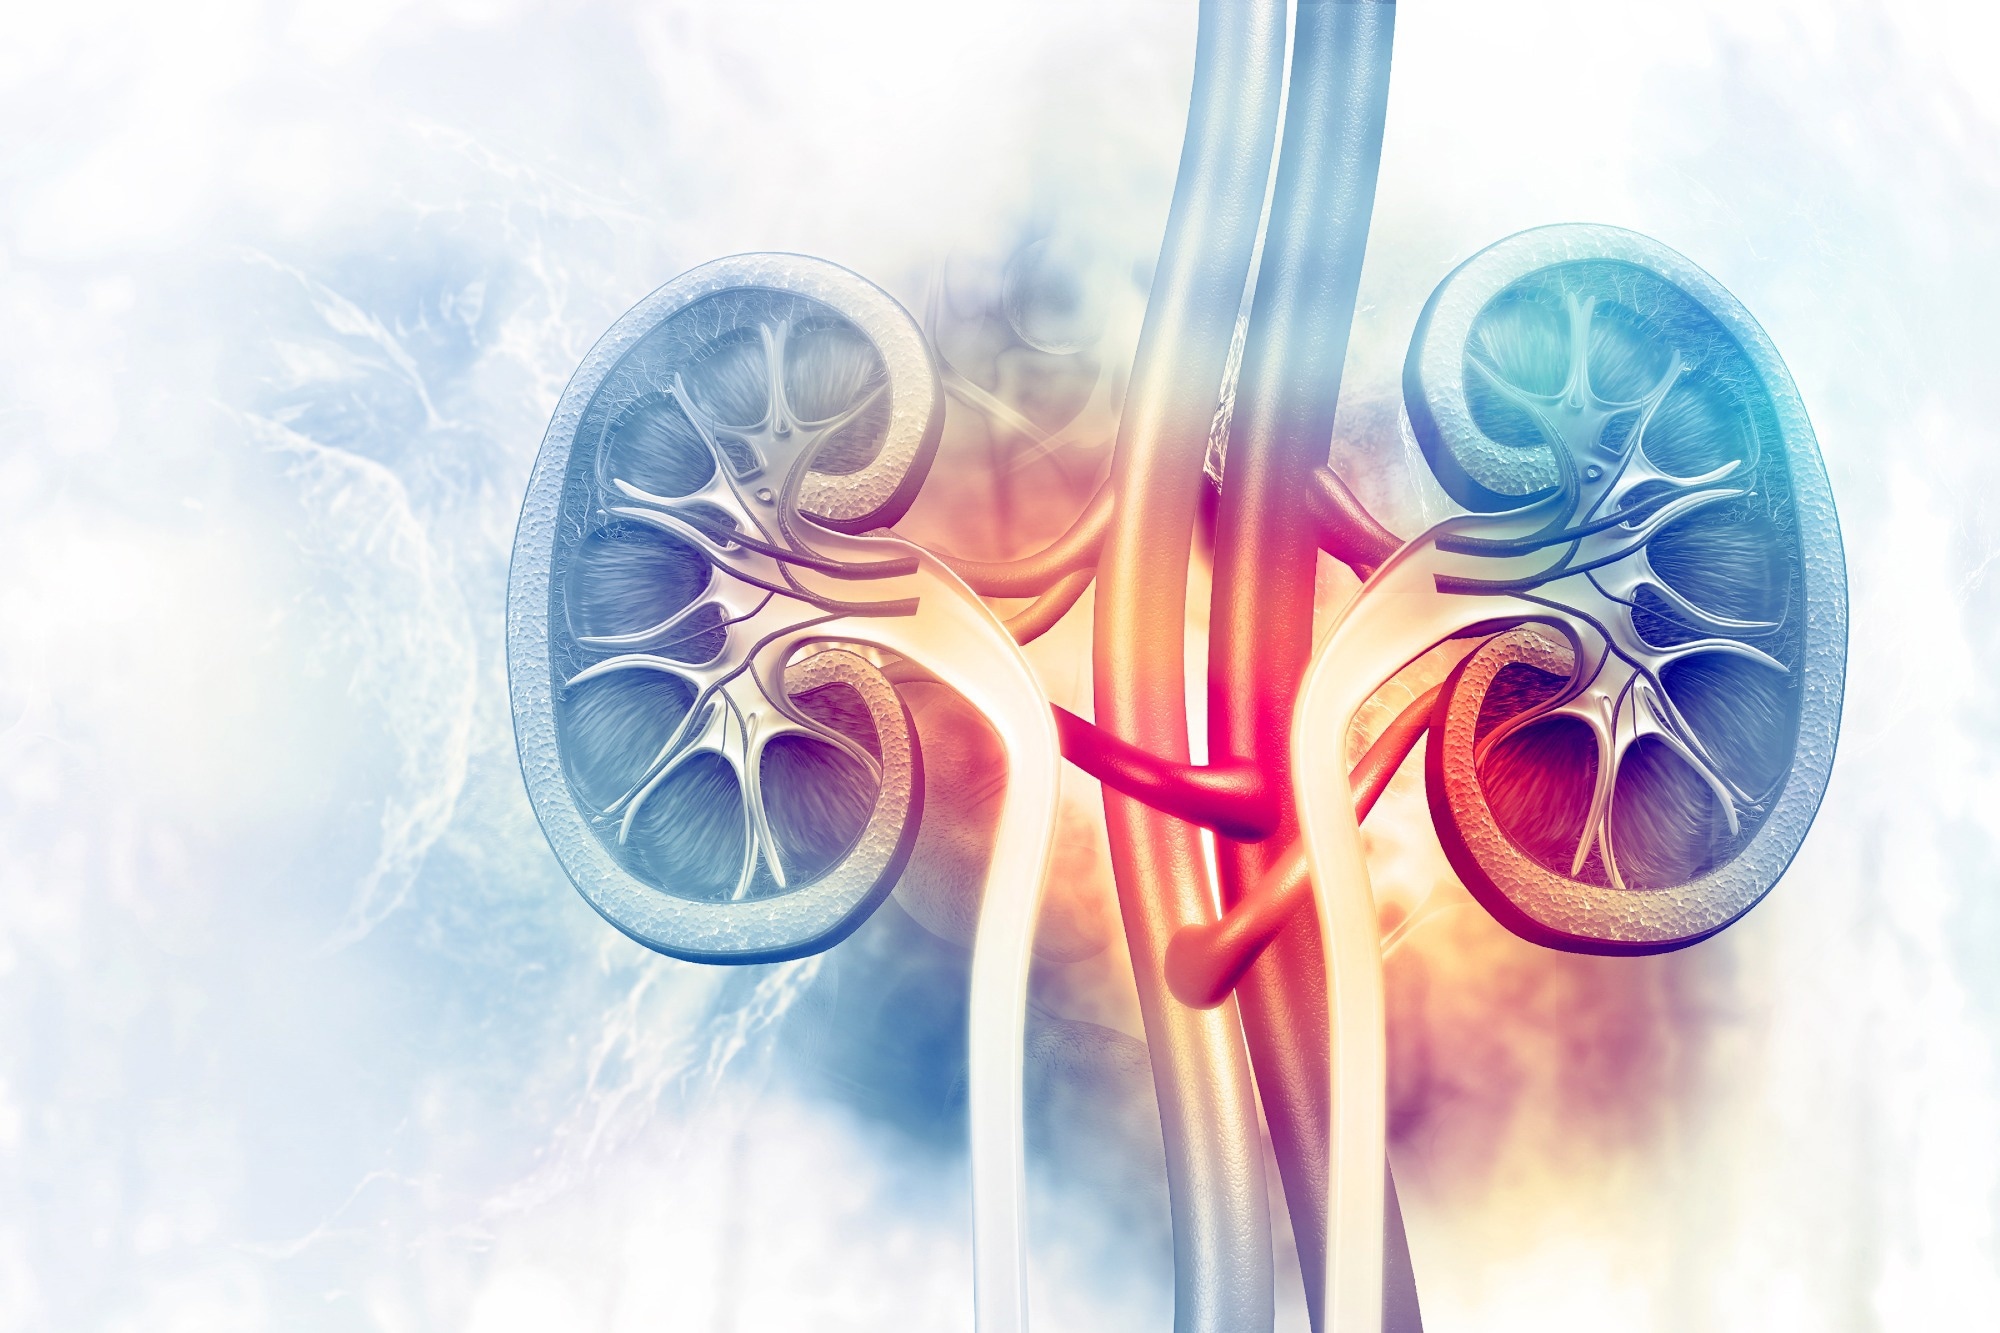 Study: Derivation and external validation of a simple risk score for predicting severe acute kidney injury after intravenous cisplatin: cohort study. Image Credit: crystal light / Shutterstock